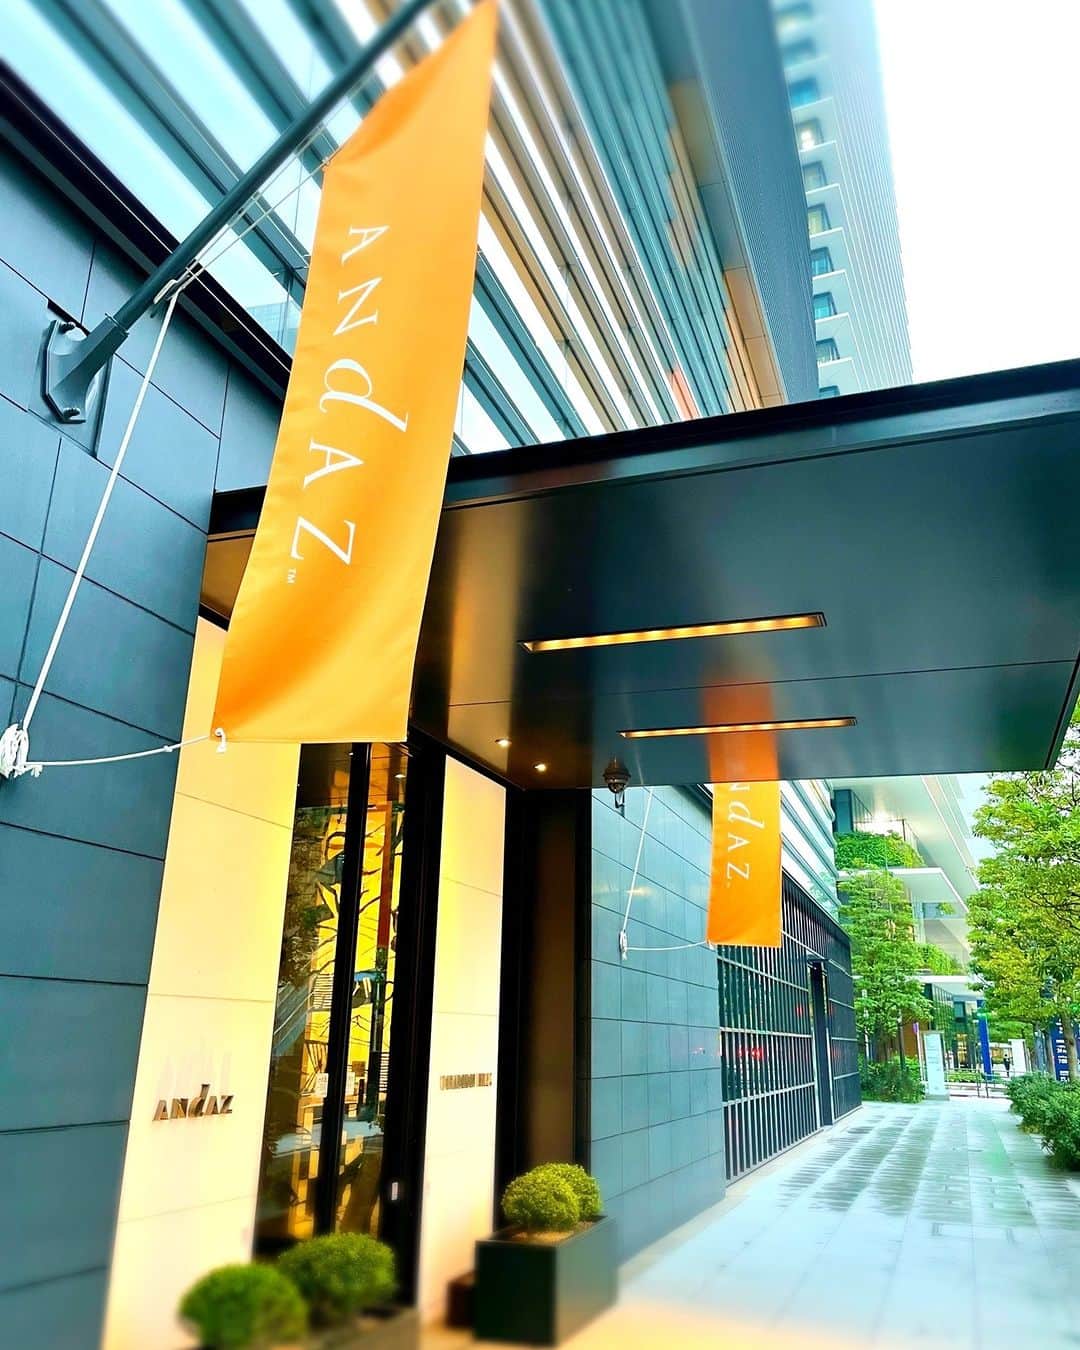 Andaz Tokyo アンダーズ 東京のインスタグラム：「アンダーズ 東京は、2014年の開業以来、多くのお客様にご愛顧いただき、本日で開業9周年を迎えることができました。これからも、皆さまがそれぞれのスタイルで、心地よい上質なひと時をお過ごしいただけるように精進してまいります。  今秋には、虎ノ門ヒルズステーションタワーが開業し、虎ノ門ヒルズが全面開業を迎えます。益々盛り上がる虎ノ門の街で、アンダーズ 東京も皆様にインスパイアリングな体験をお届けしてまいります。  Today marks our 9th anniversary! We are thankful and proud to have been welcoming guests from all over the world since the opening of Andaz Tokyo Toranomon Hills in 2014. We are continuously committed to provide our guests a level of service and unique experiences that exceed expectations.  This fall, the Toranomon Hills complex will be completed with the opening of the Toranomon Hills Station Tower. Andaz Tokyo will continue to provide inspiring and immersive experiences through the local culture and the neighborhood of Toranomon.」